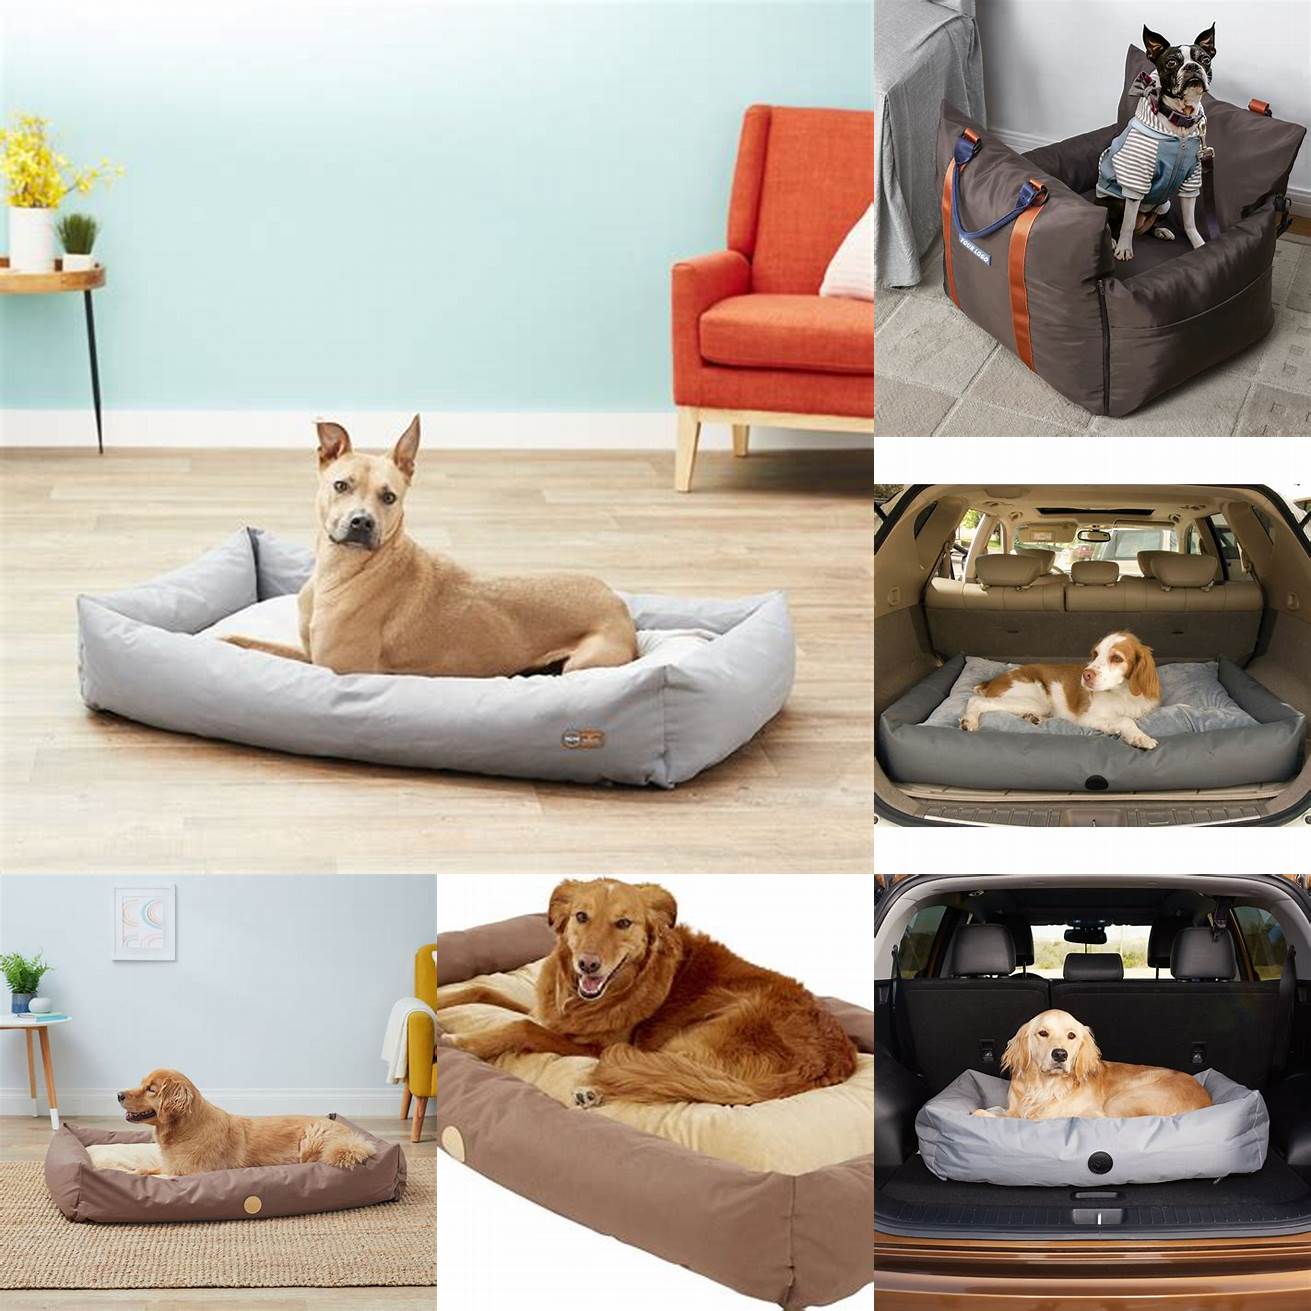 2 Best for Travel The KH Pet Products Travel Dog Bed